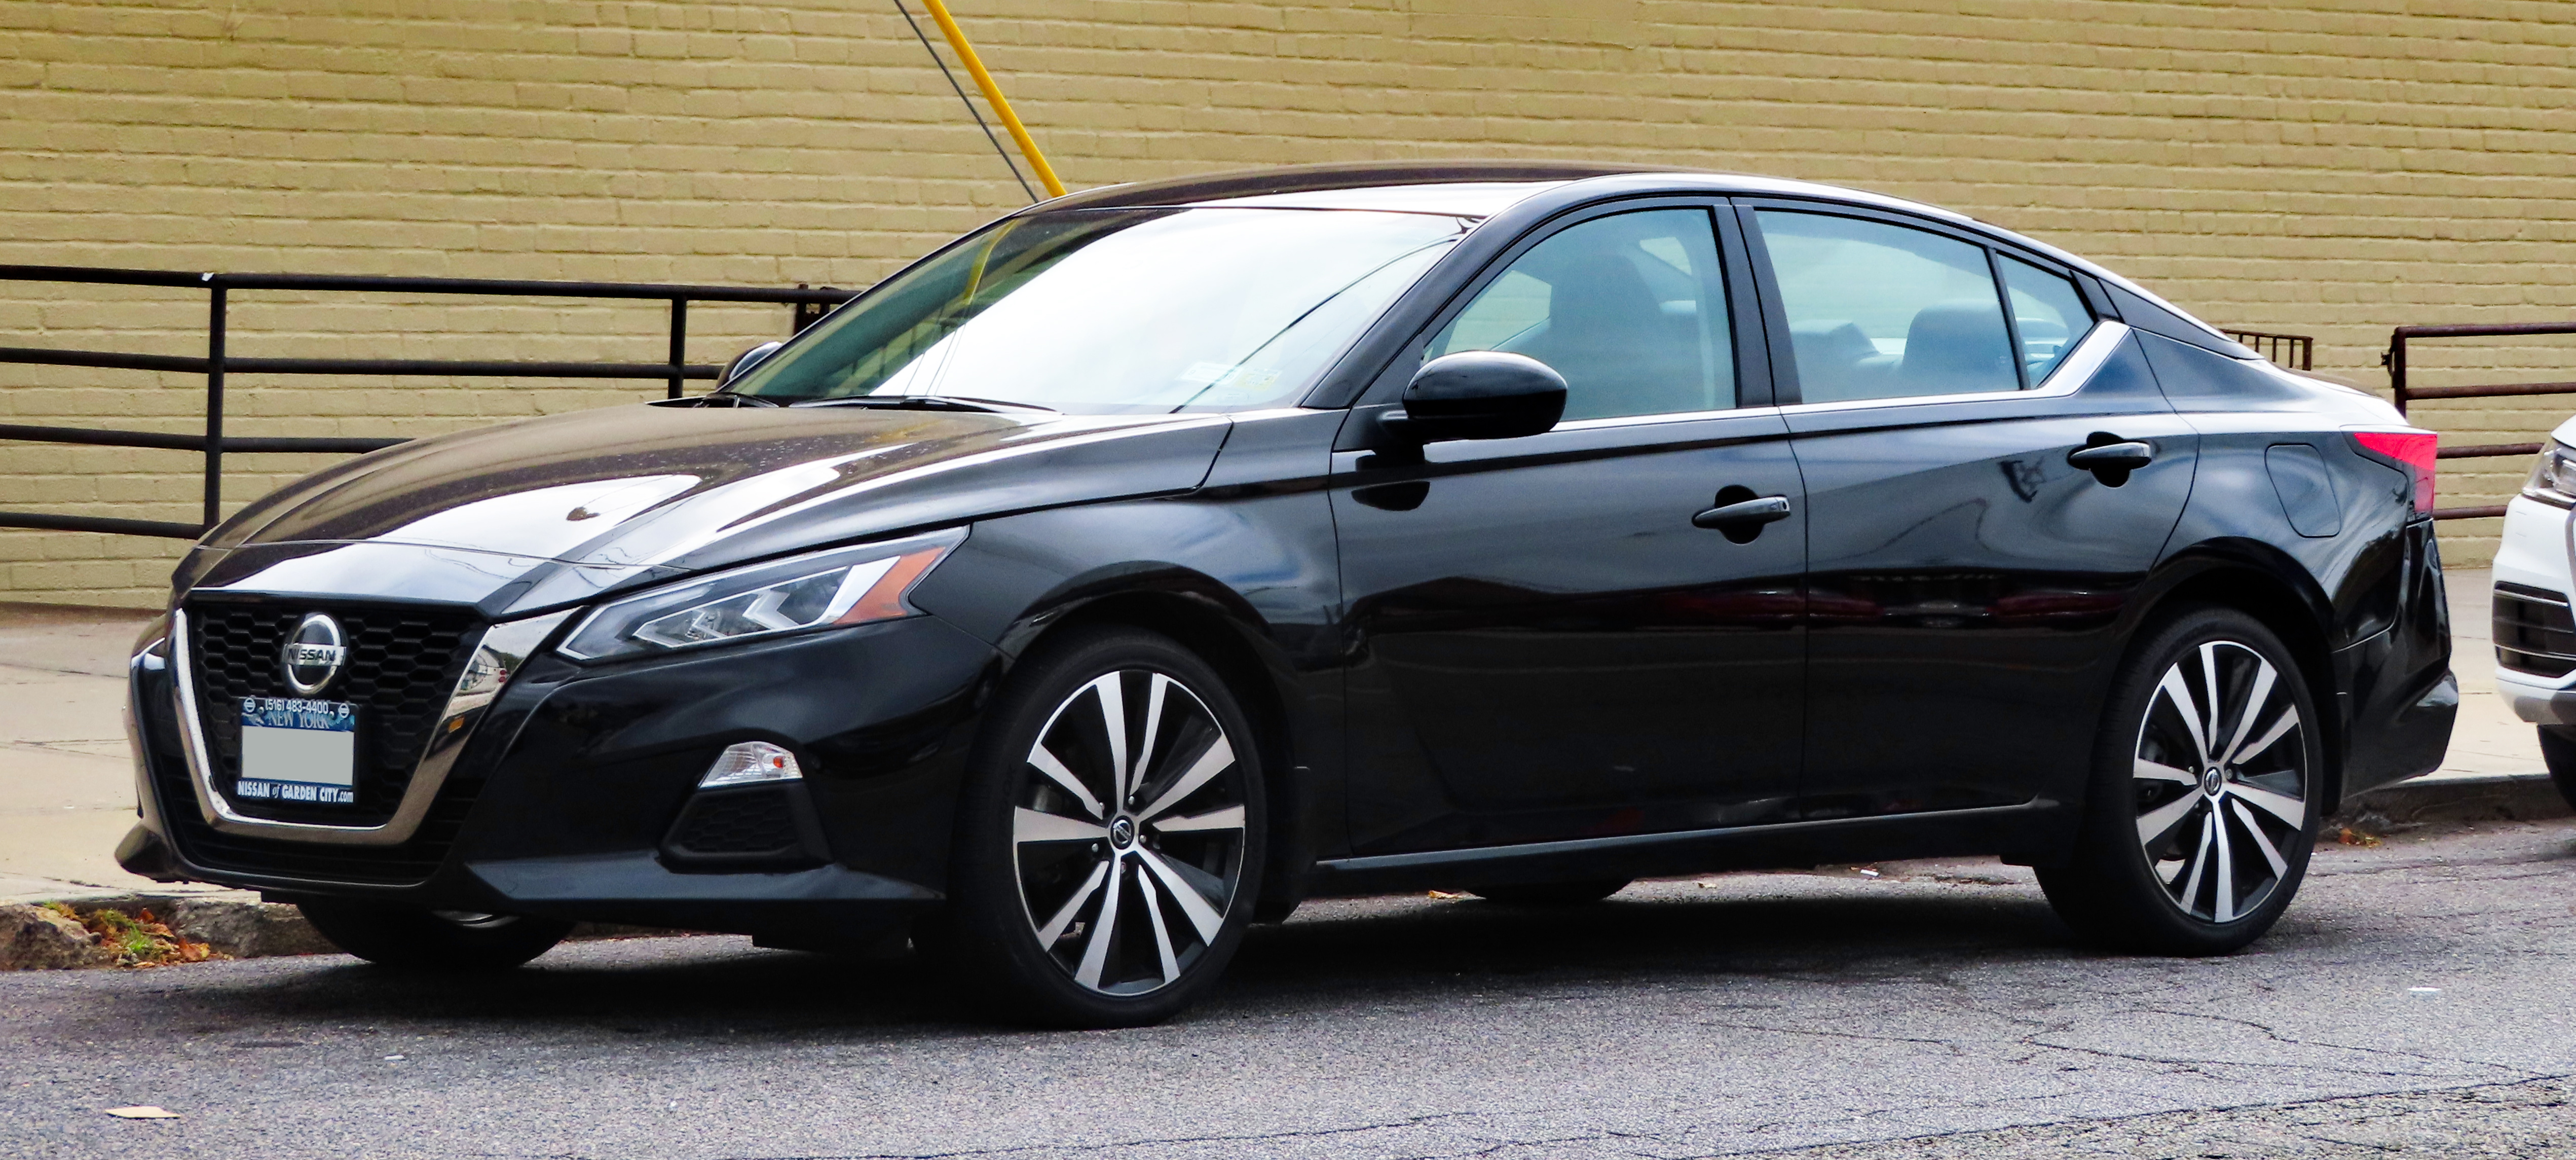 Nissan Altima best specifications